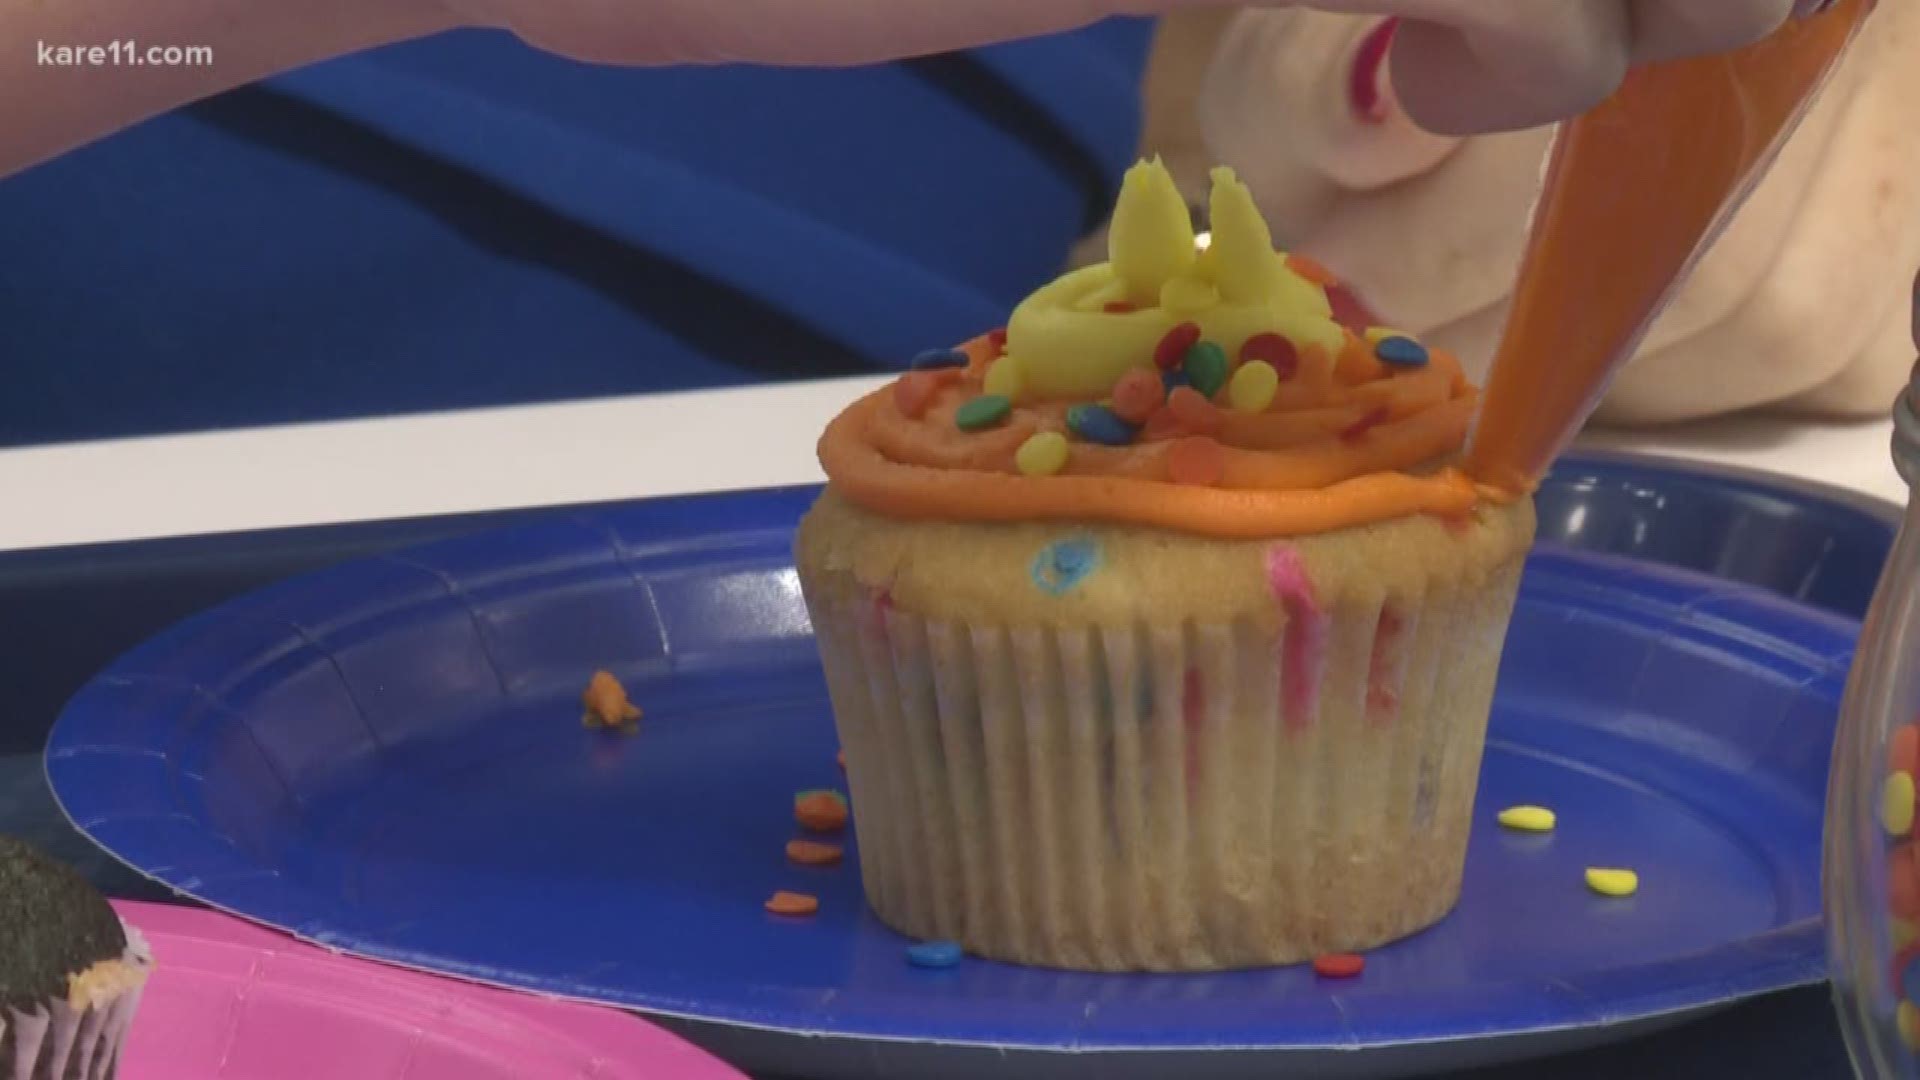 Build-A-Bear Workshop is branching into the baking business at Mall of America. It's only the second one in the country. https://kare11.tv/2MiG78B